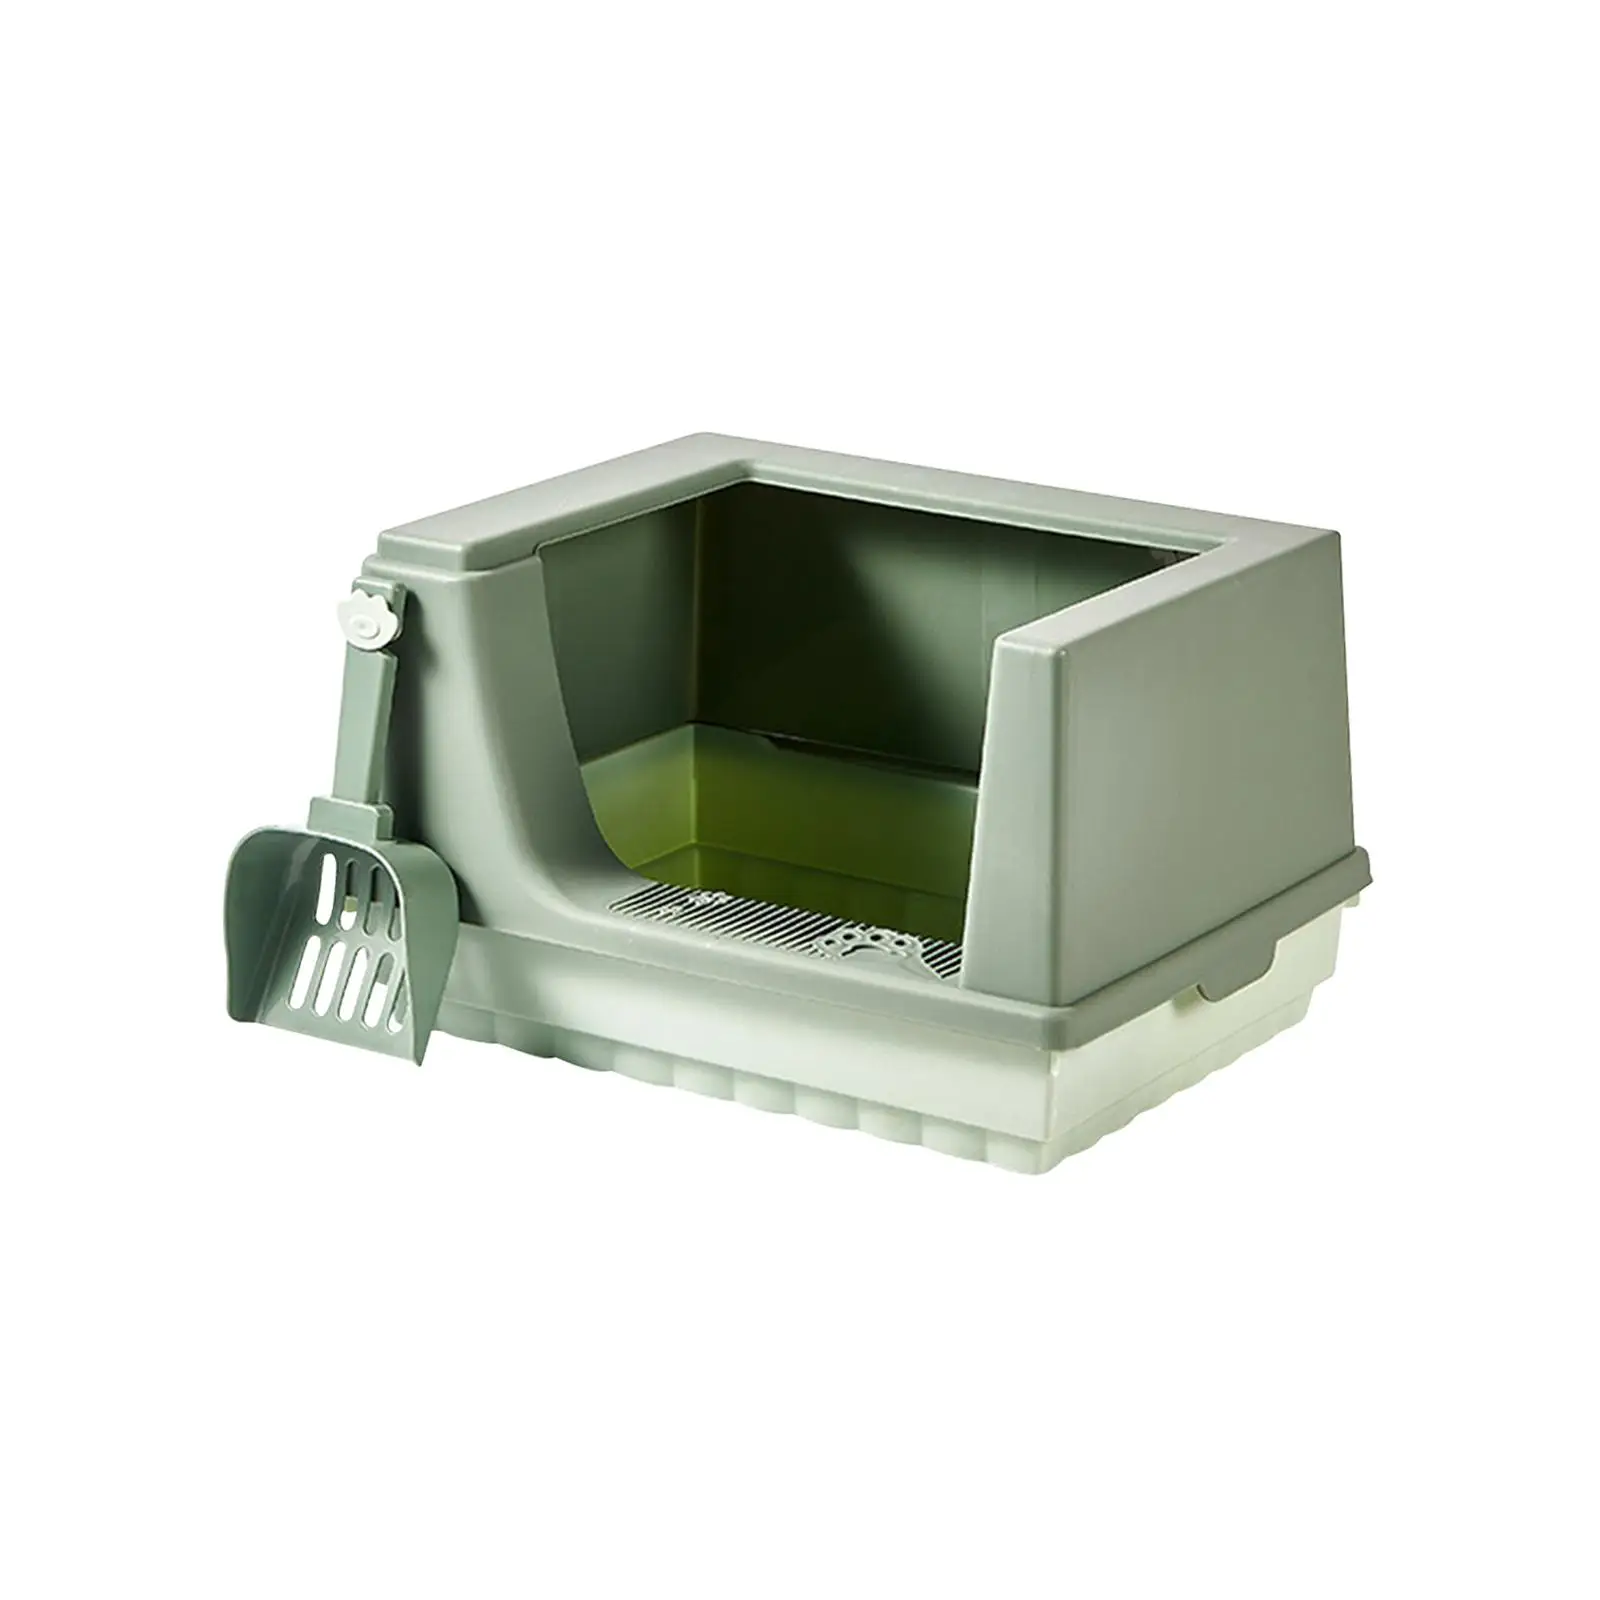 Cat Litter Box Tray Toilet Anti Splash High Sides Semi Enclosed for Small Pets Polished Interior Removable Base Durable